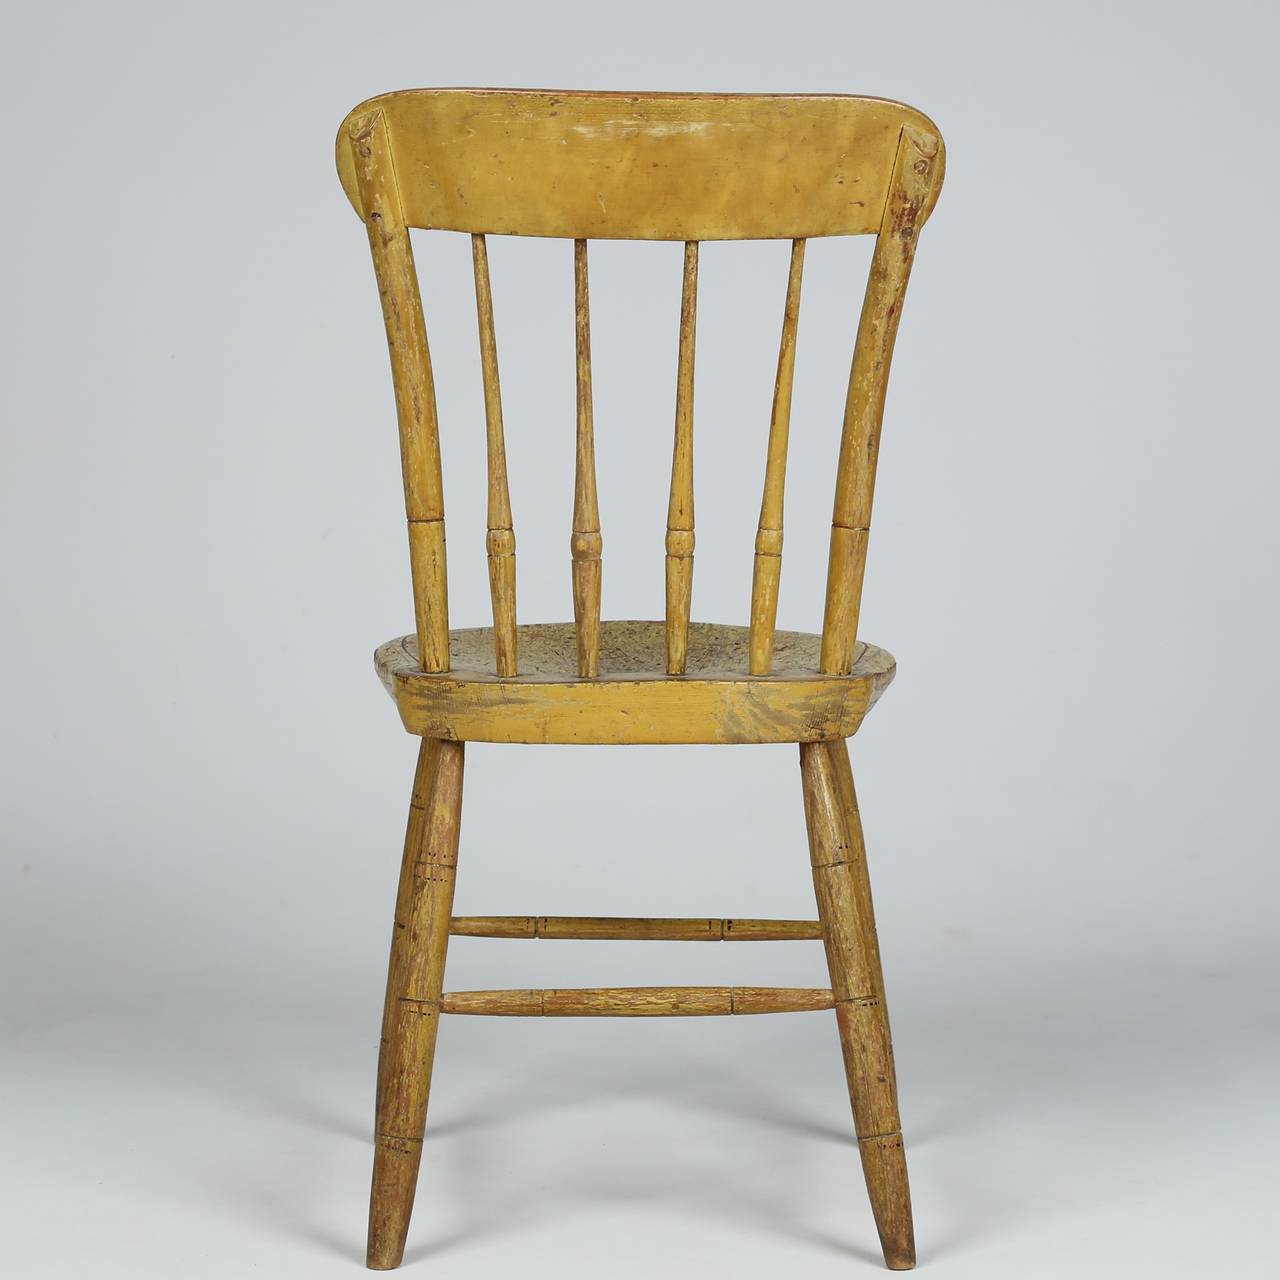 Early 19th Century Pair of American Windsor Yellow Painted Side Chairs, Massachusetts, circa 1826